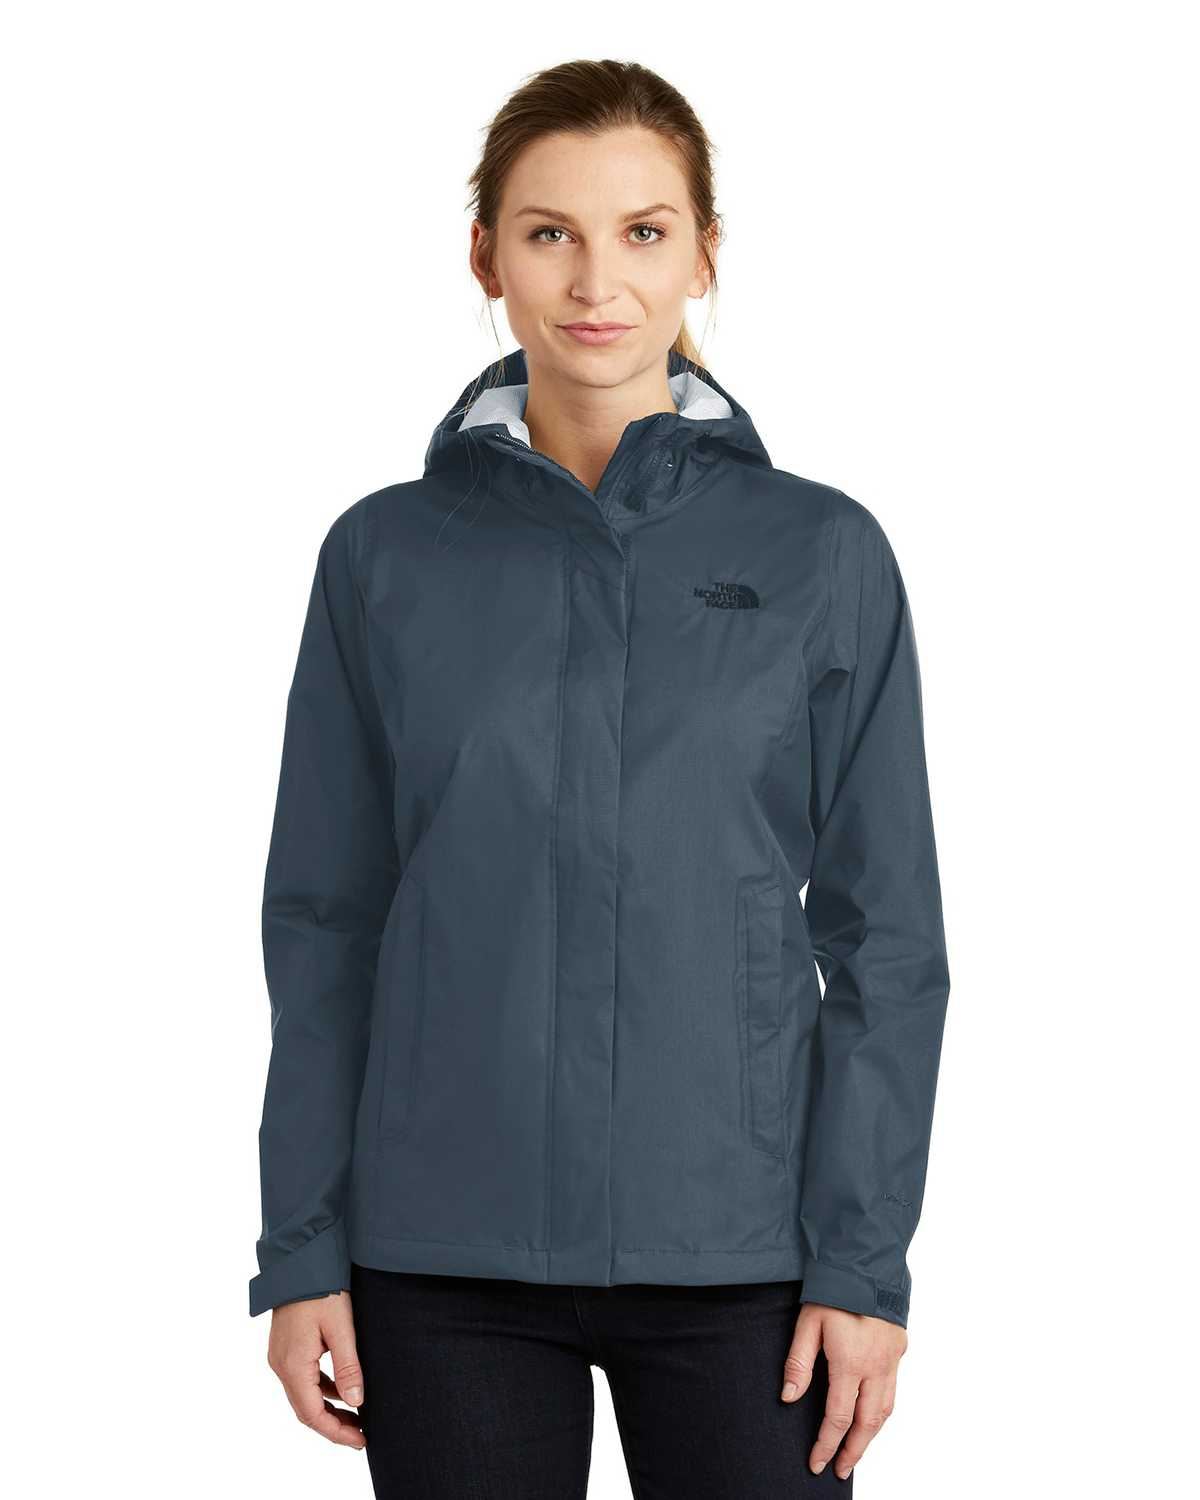 'The North Face NF0A3LH5 Ladies DryVent Rain Jacket'